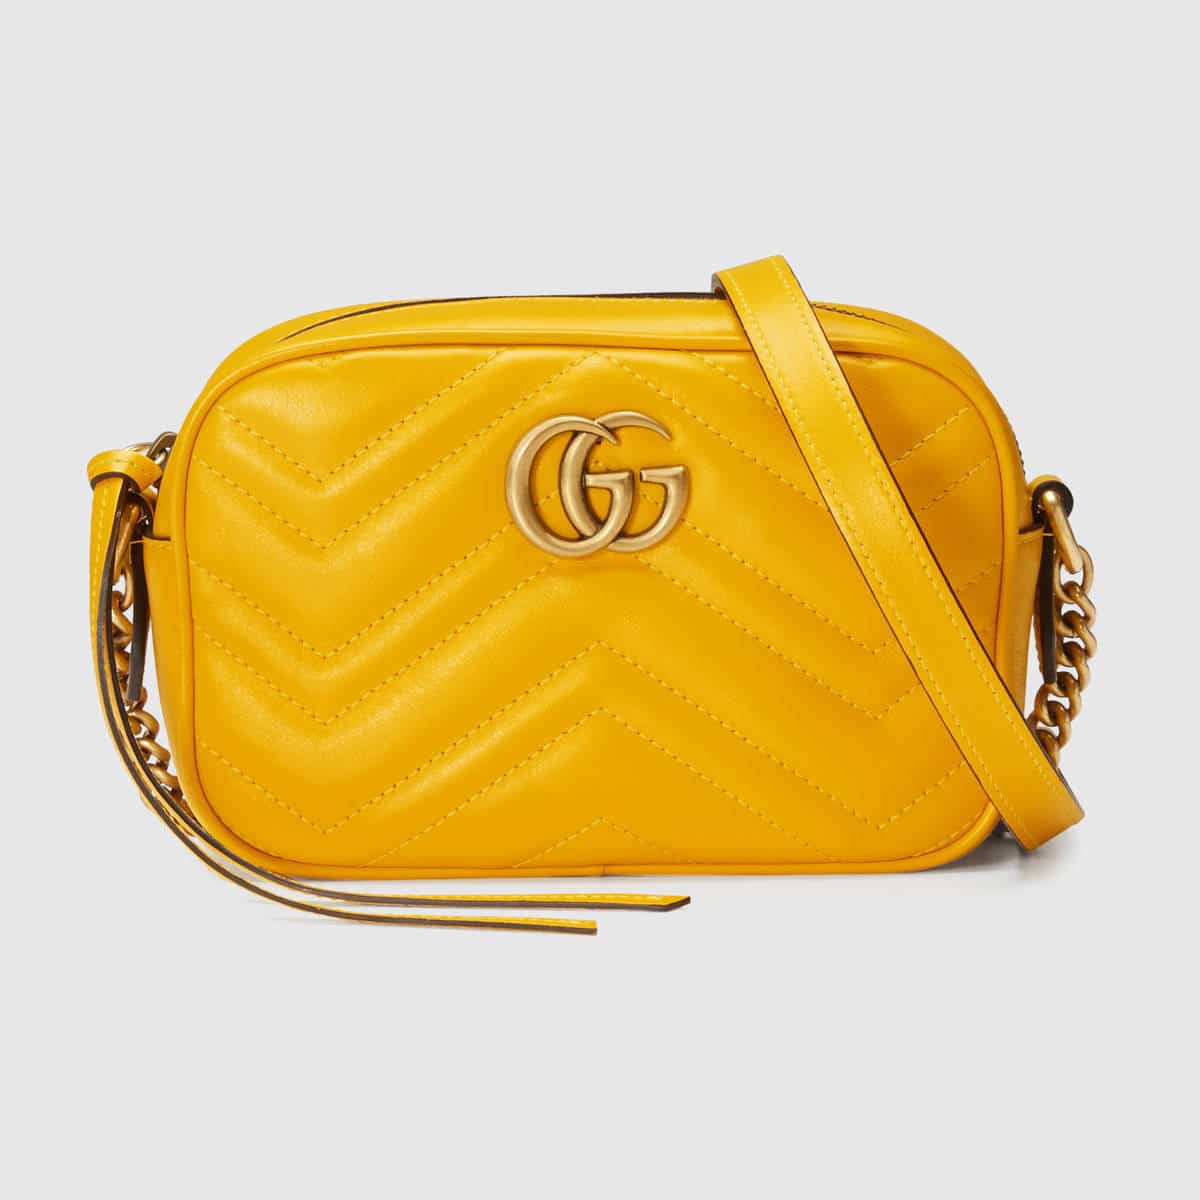  Gucci  GG Marmont  Camera Bag  Reference Guide Spotted Fashion